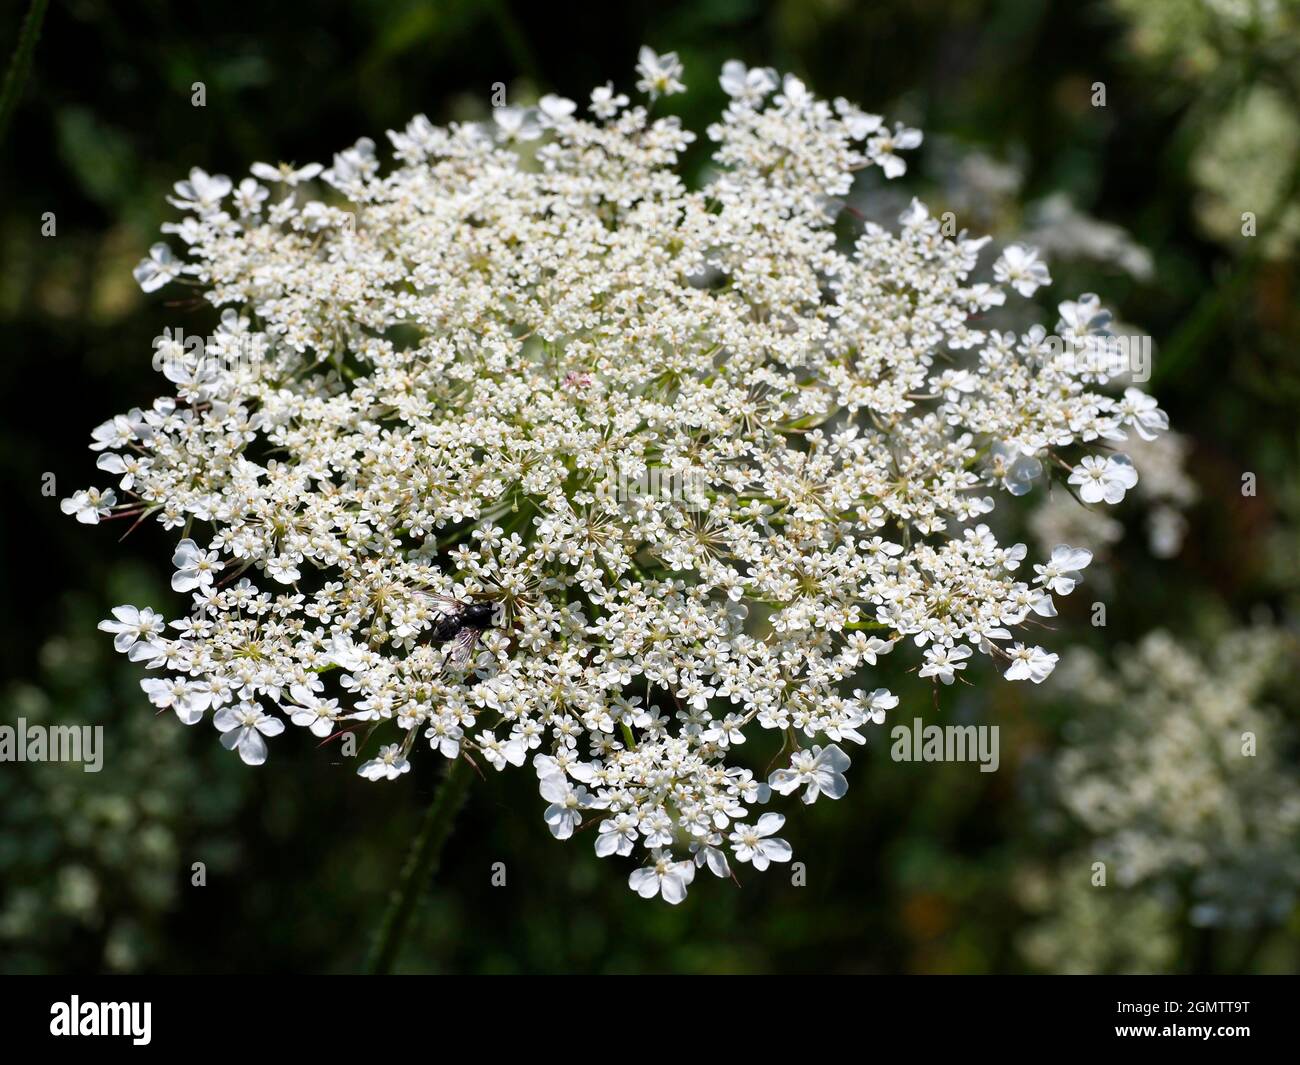 River Thames, Oxfordshire, England - 16 July 2019      Anthriscus sylvestris, known as cow parsley is a herbaceous biennial or short-lived perennial p Stock Photo